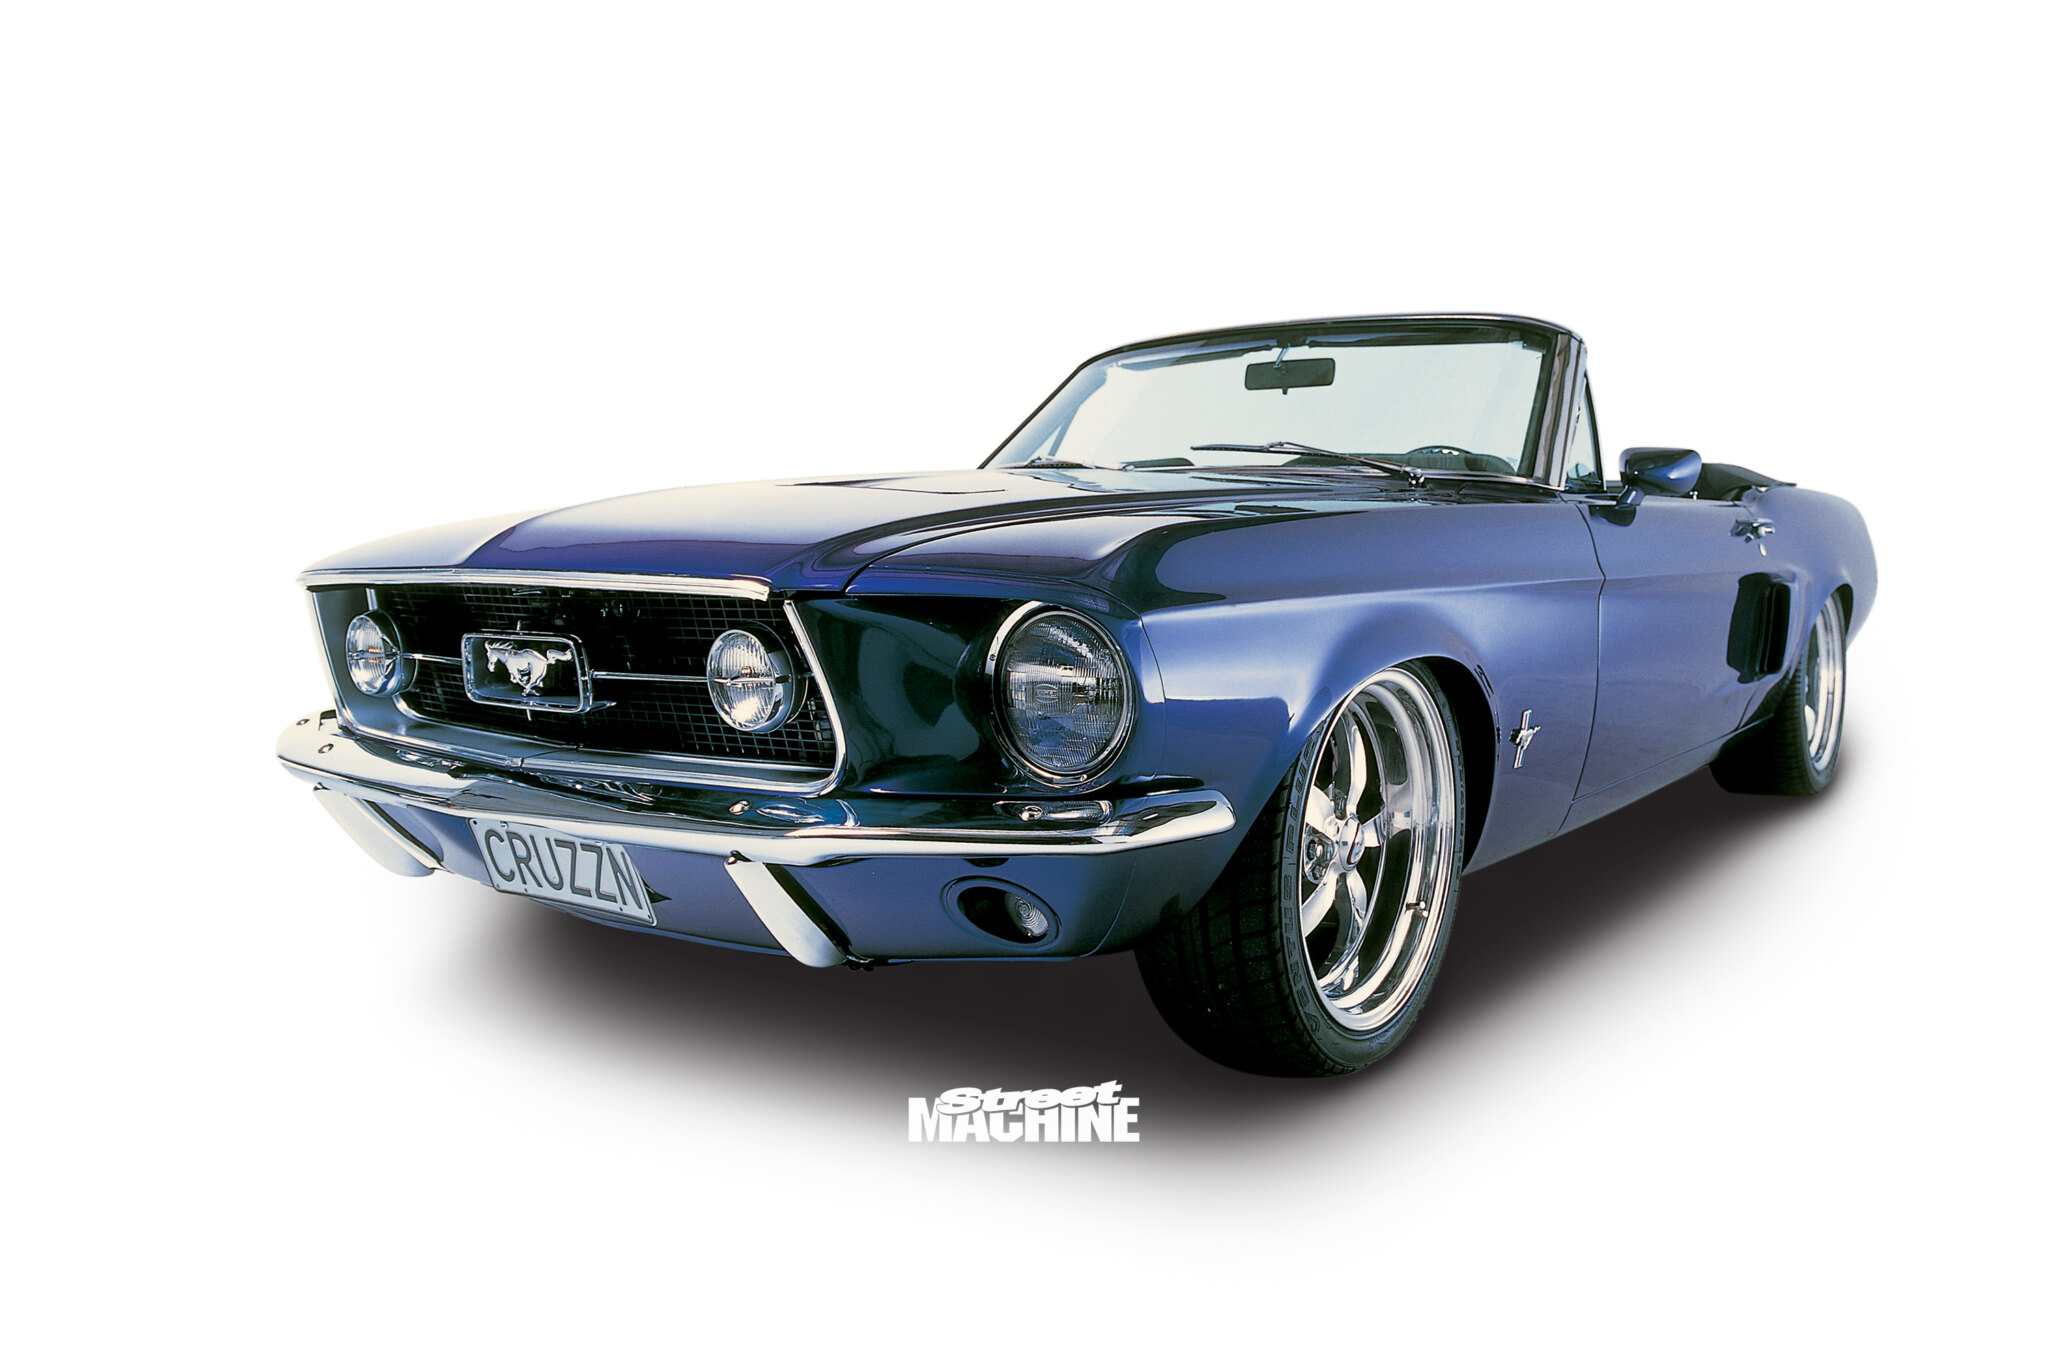 Russell Clarke’s 416-cube 1967 Mustang convertible